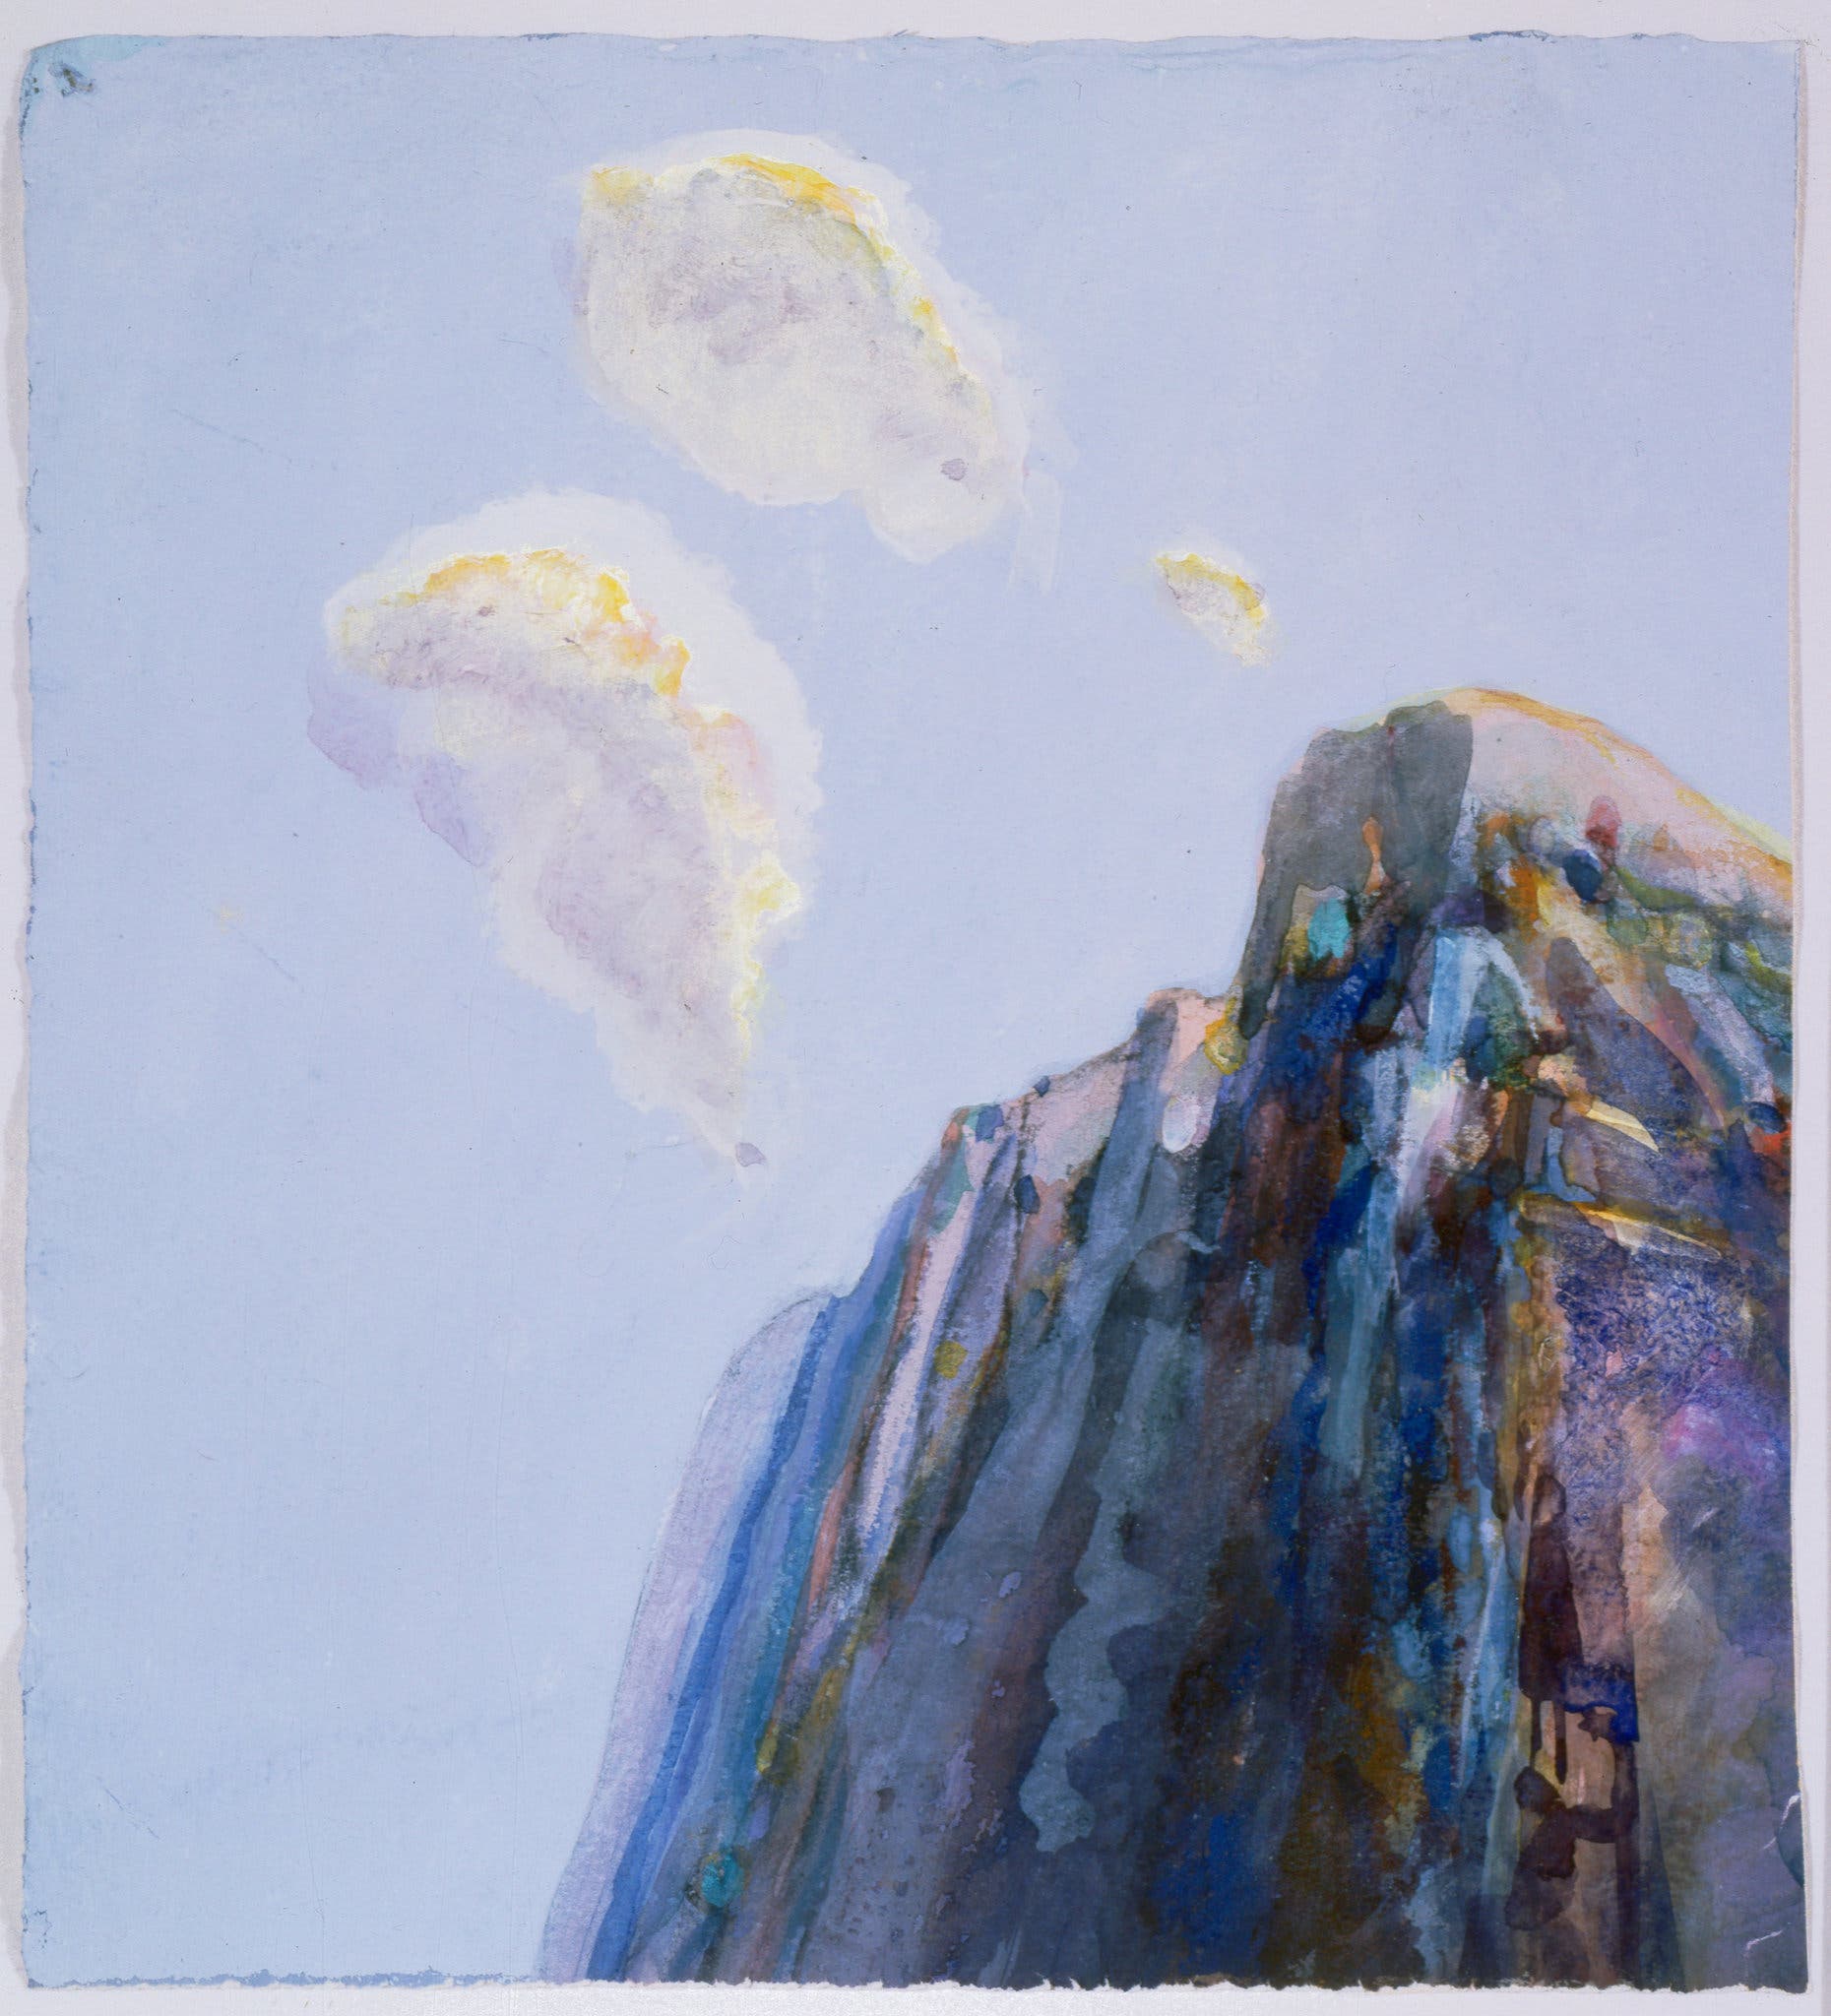 Wayne Thiebaud “Untitled (Mountain and Clouds),” circa 1965.